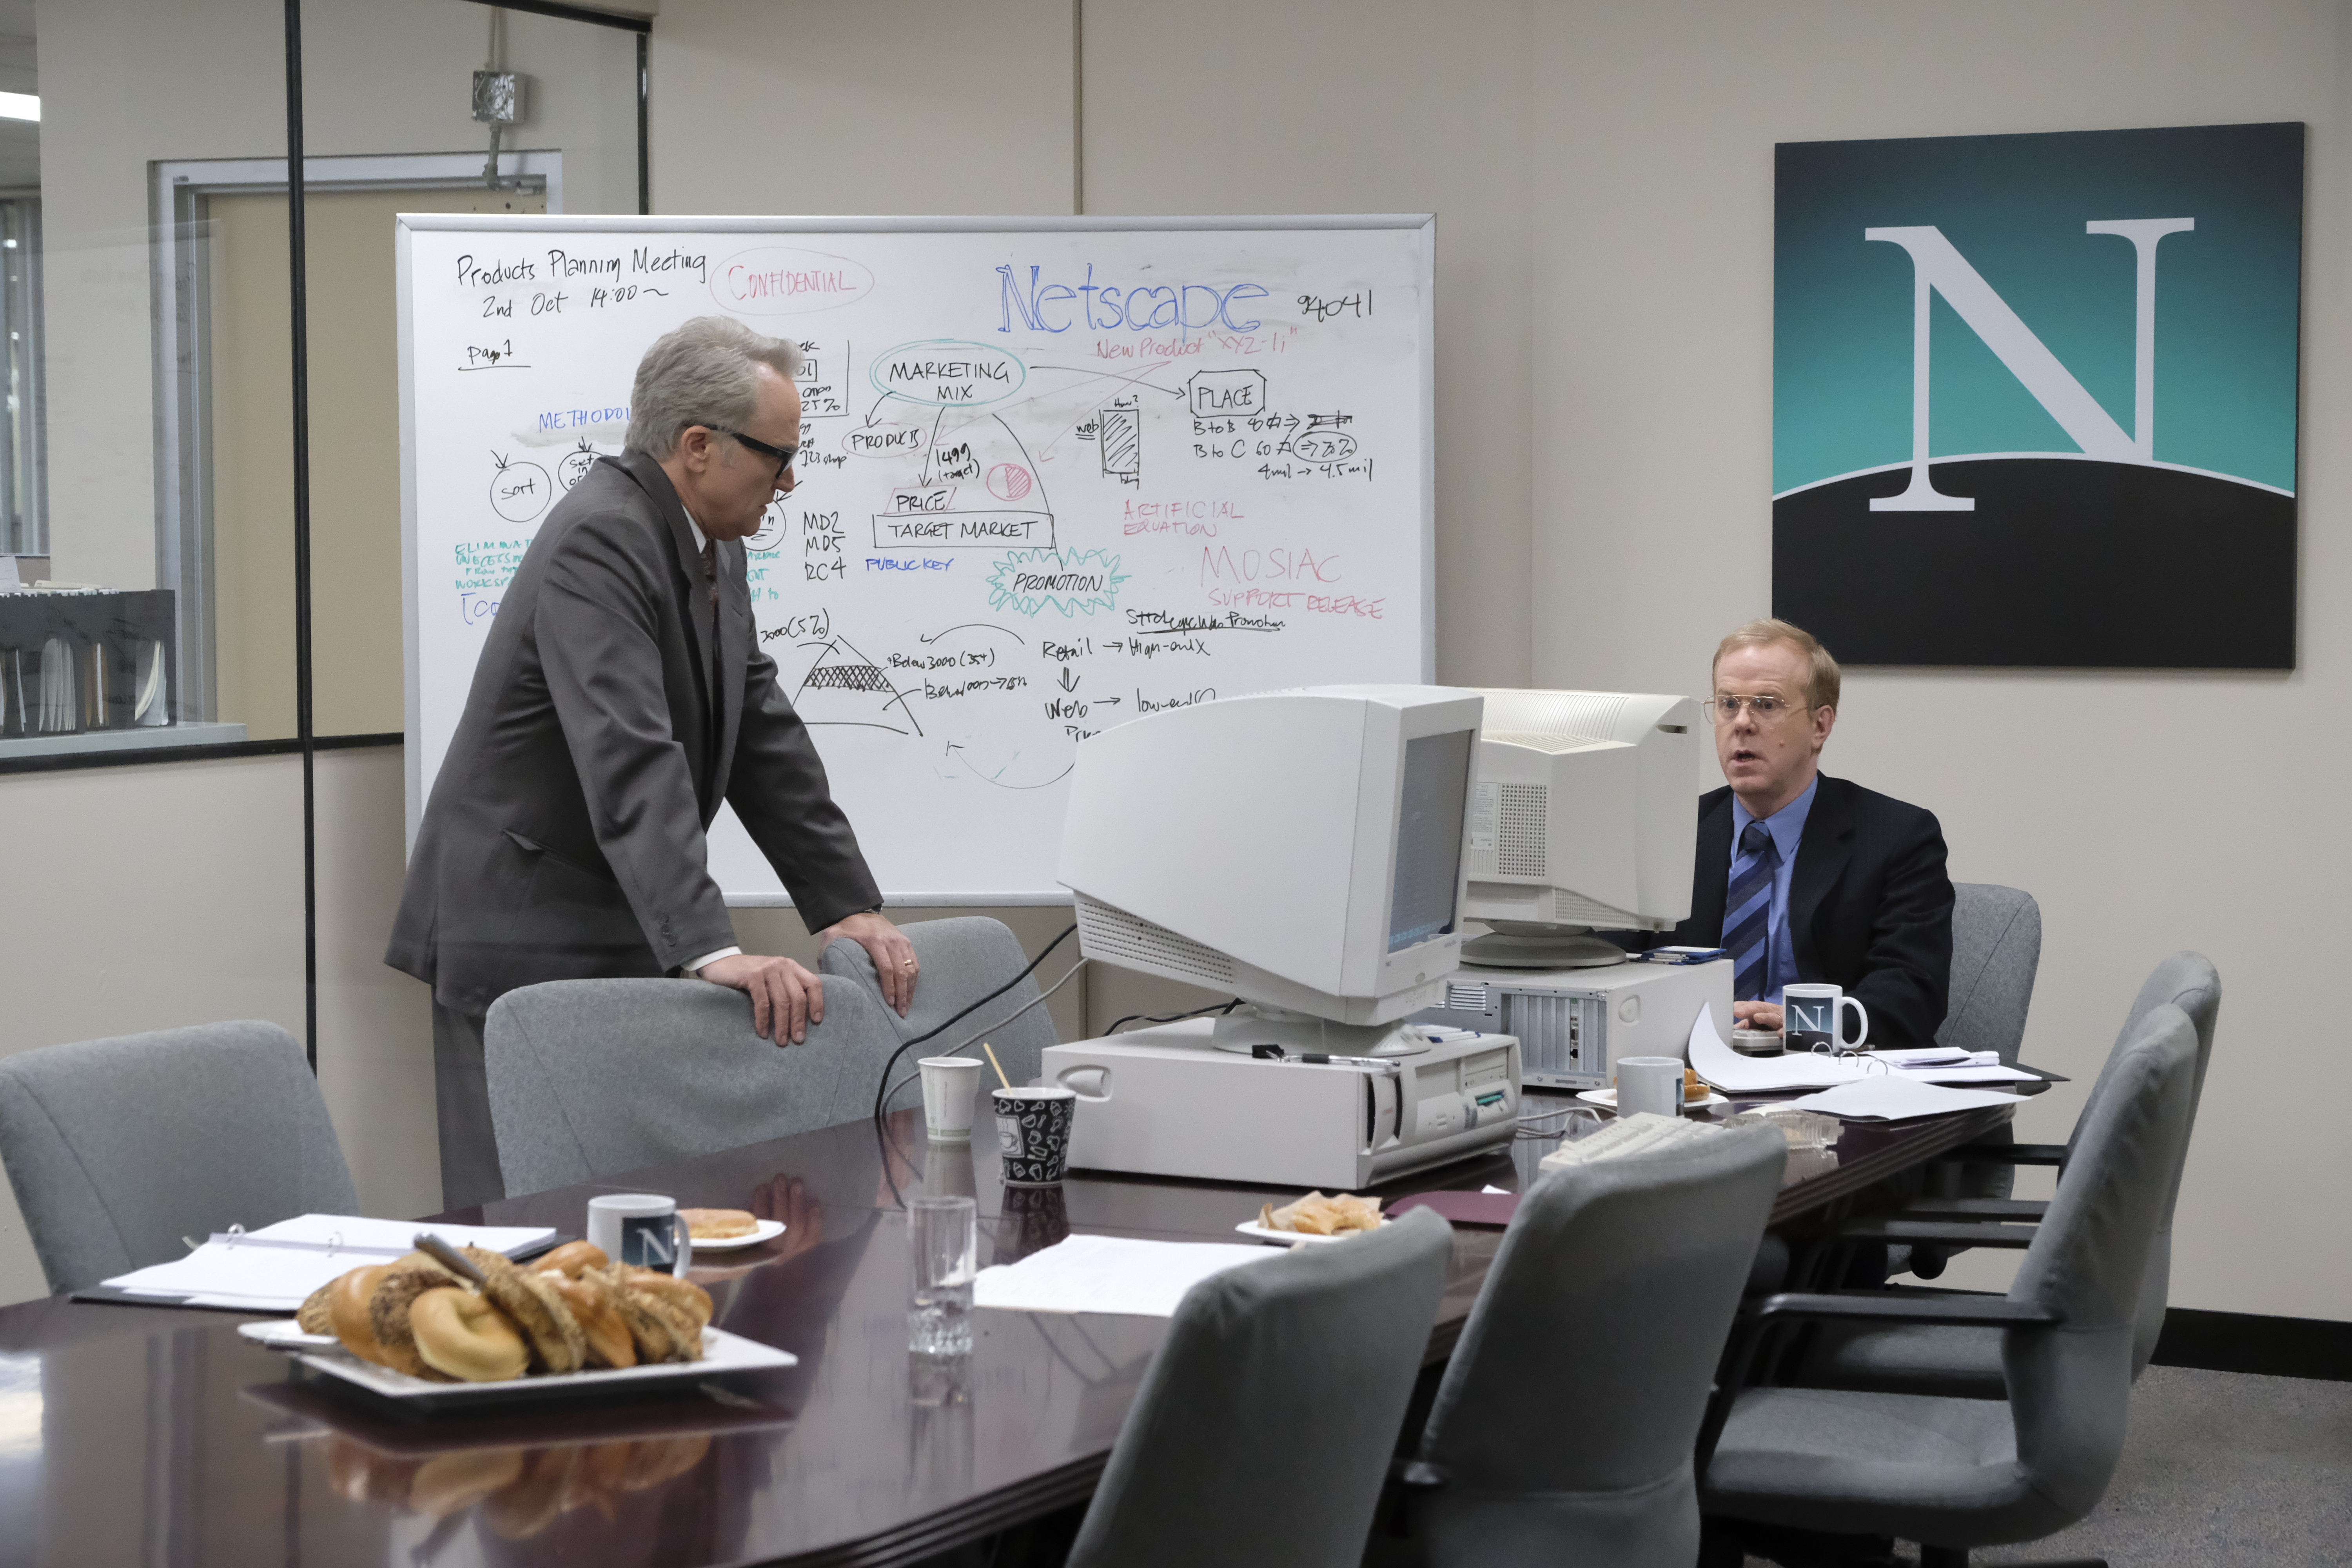 (Left to right) Bradley Whitford and John Murphy as Netscape pioneers James Barksdale and Jim Clark in National Geographic&#039;s VALLEY OF THE BOOM. (National Geographic/Bettina Strauss)